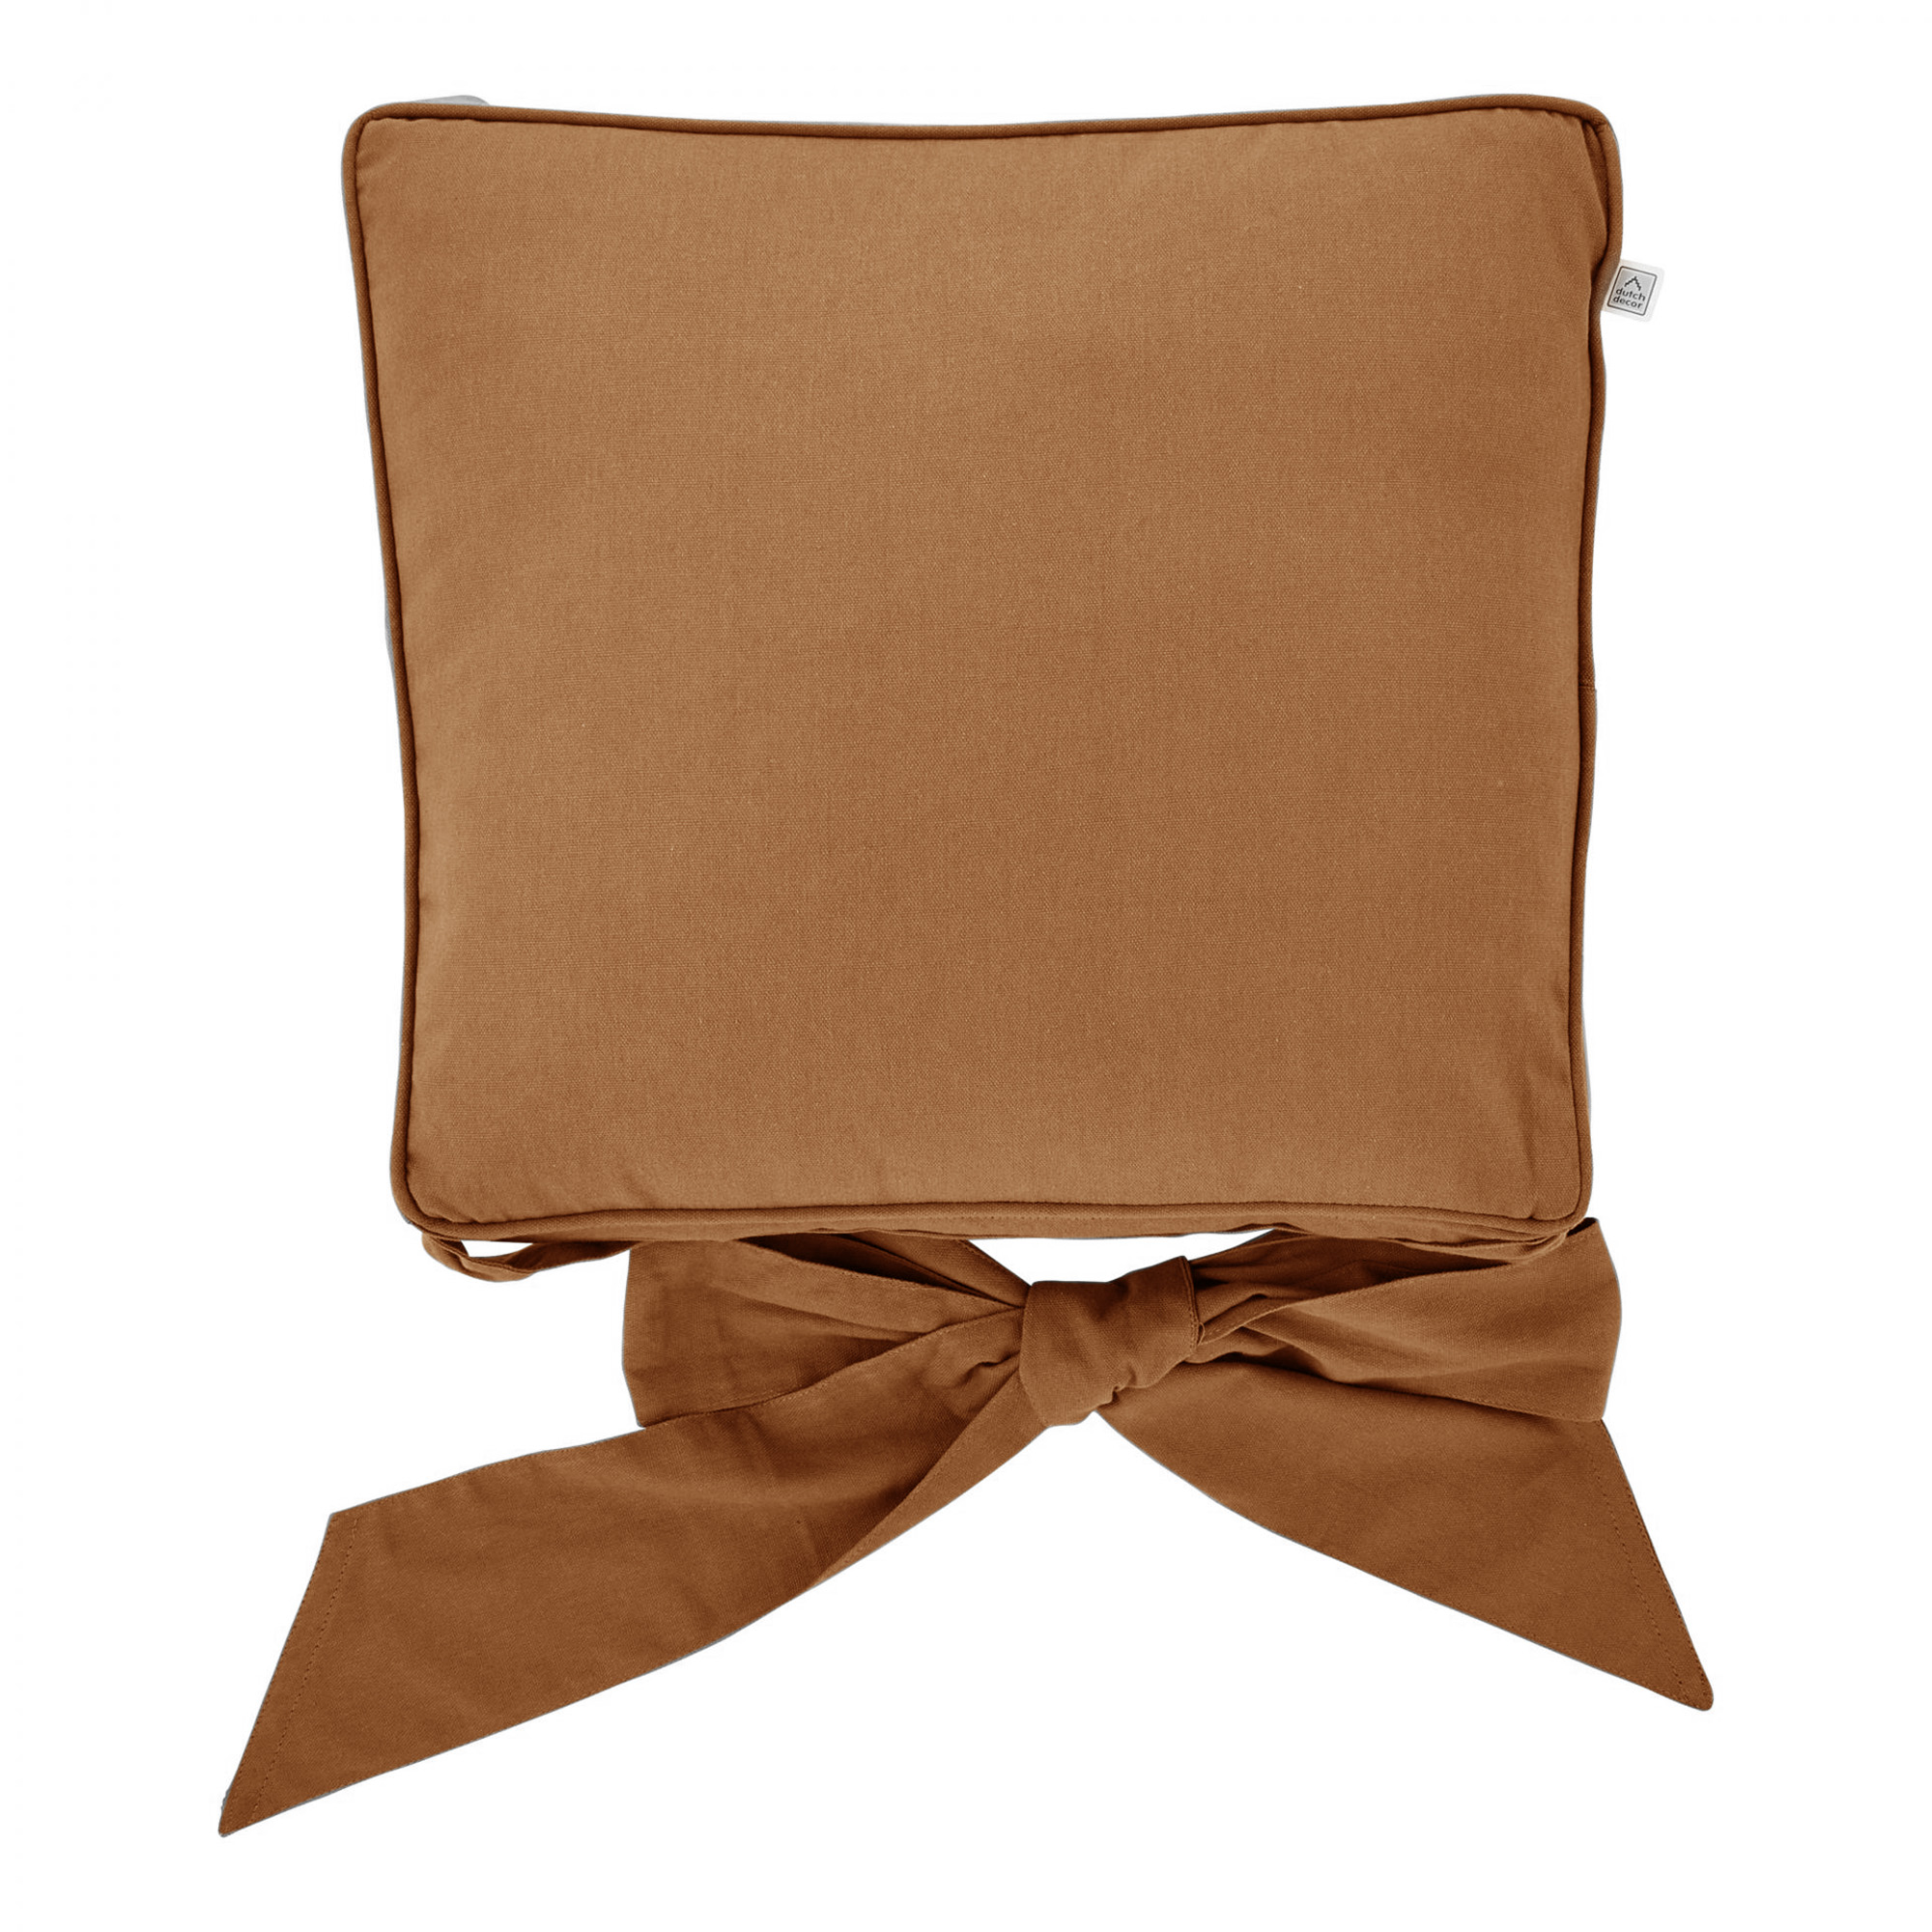 JAVAAN - Seat pad cushion cover with ties Tobacco Brown 45x45 cm